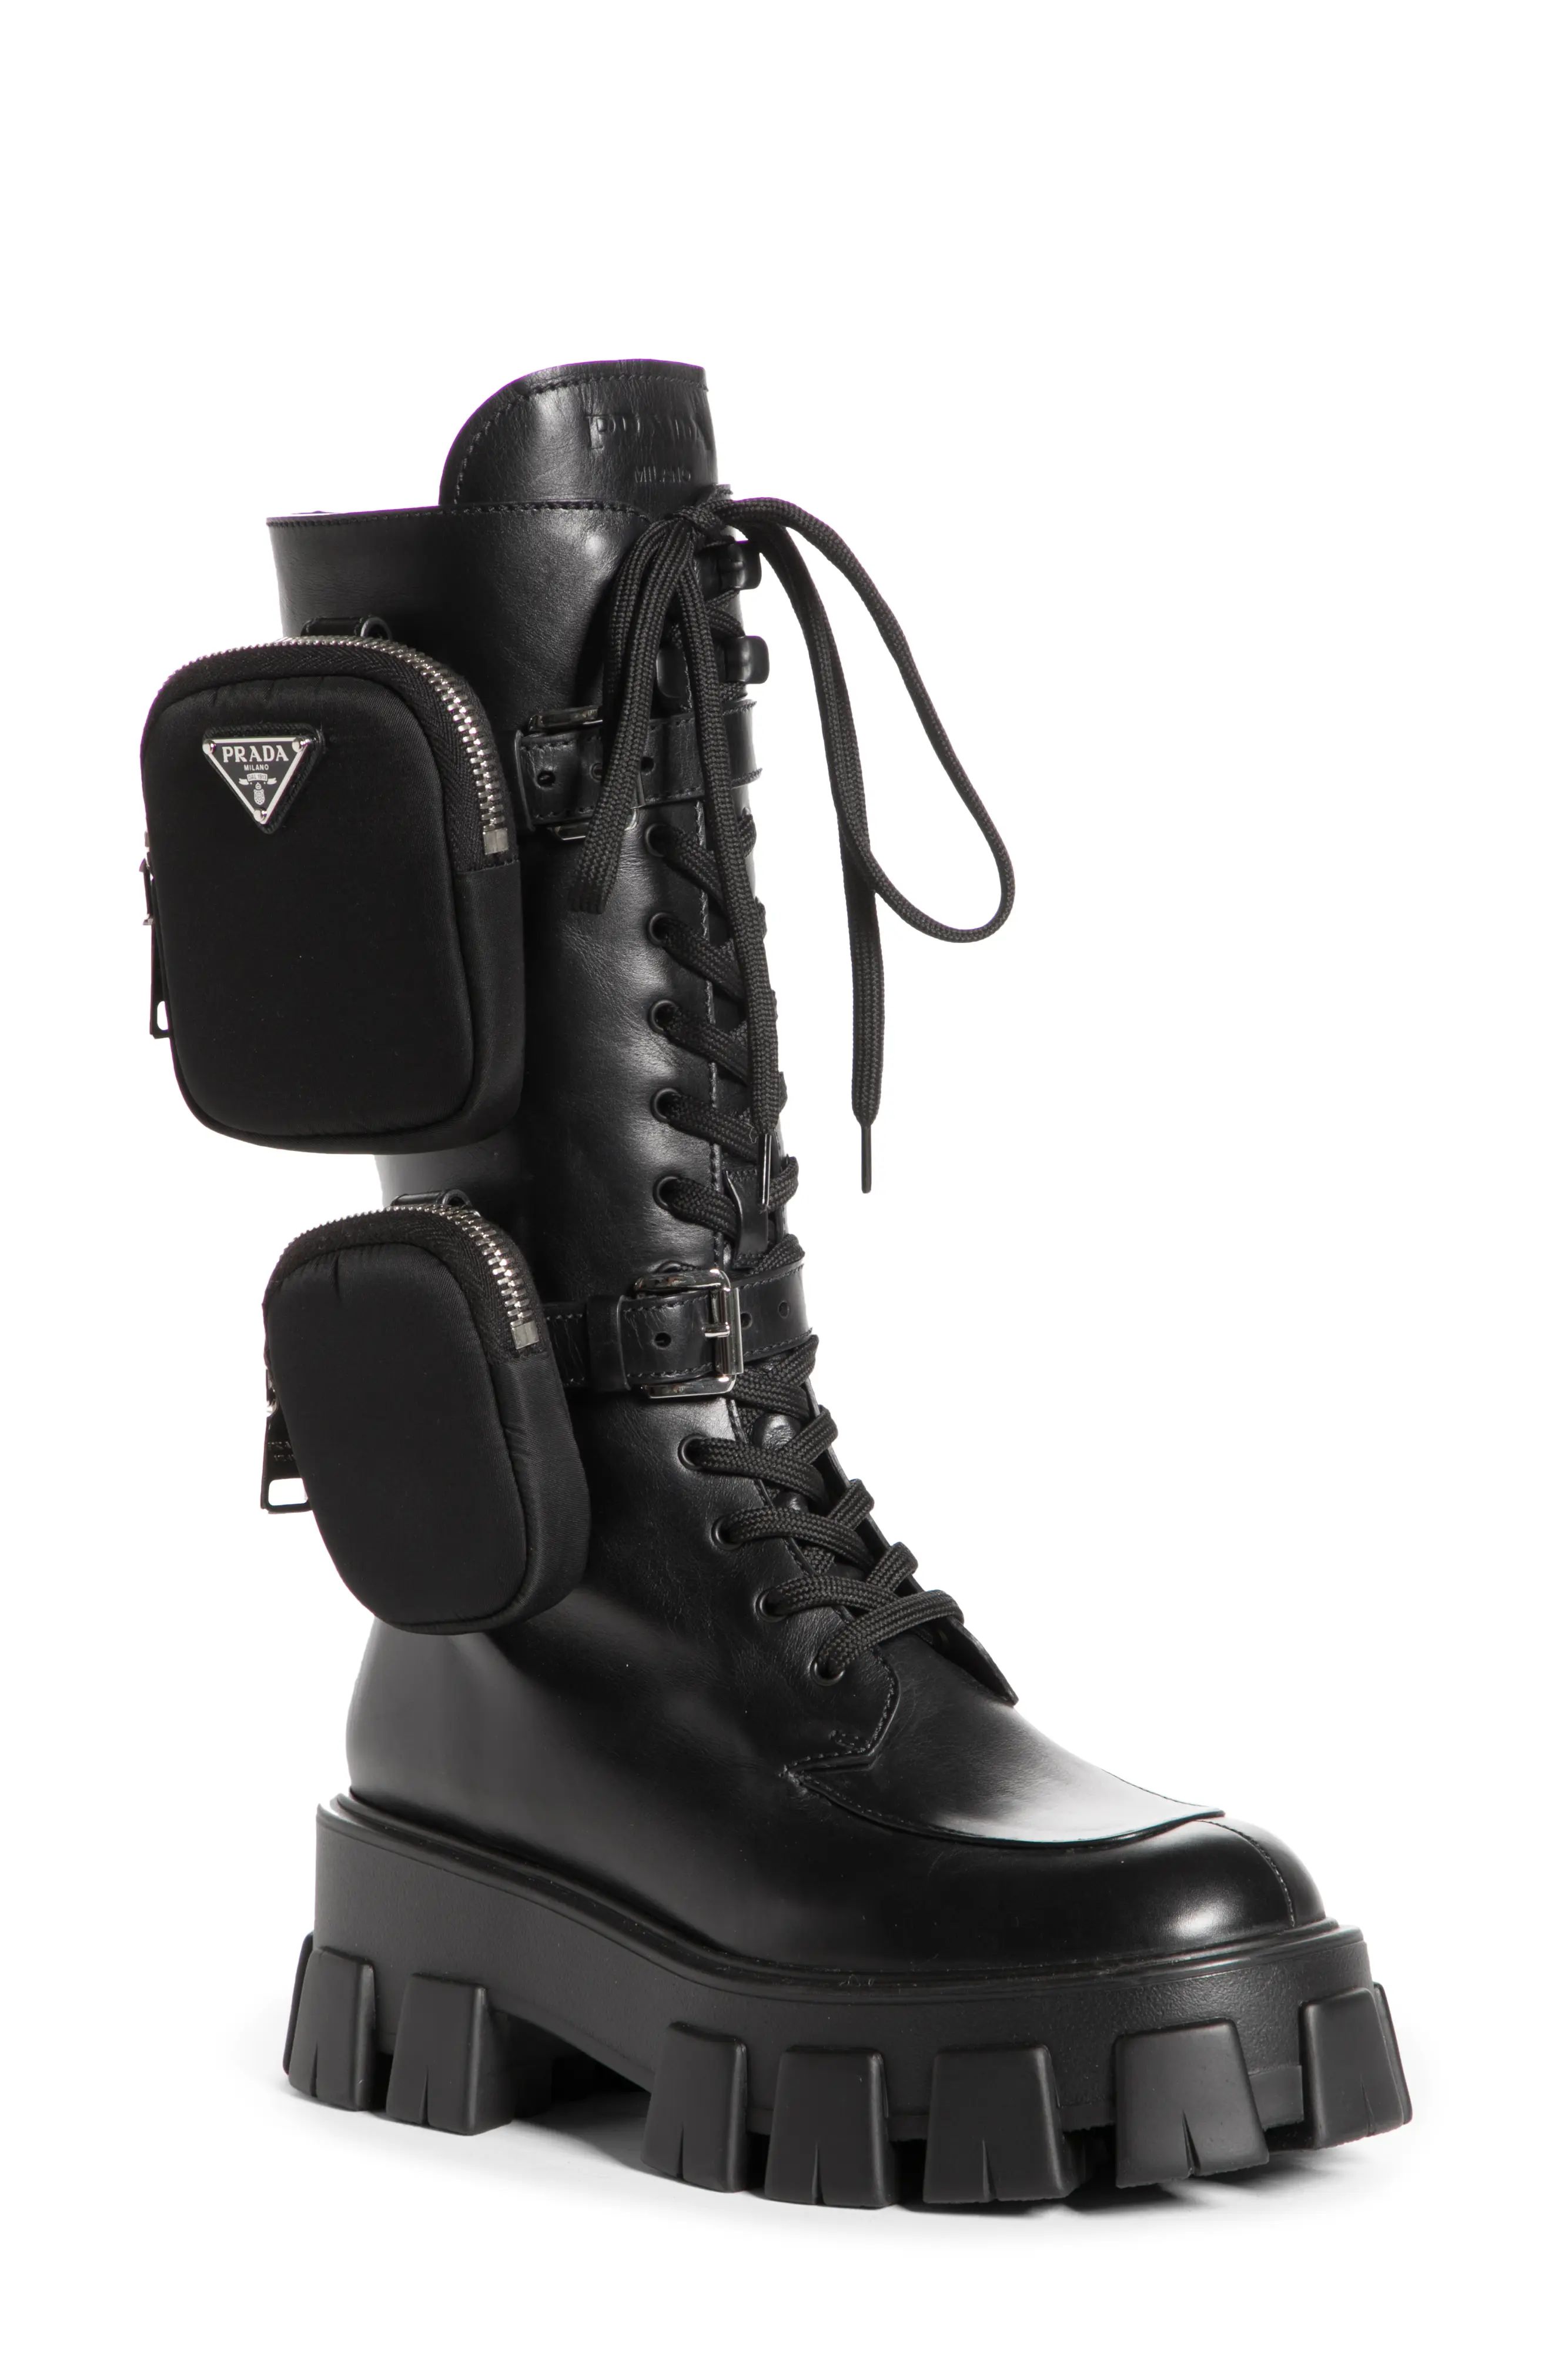 Prada Removable Pouch Combat Boot, Size 9Us in Black at Nordstrom | Nordstrom